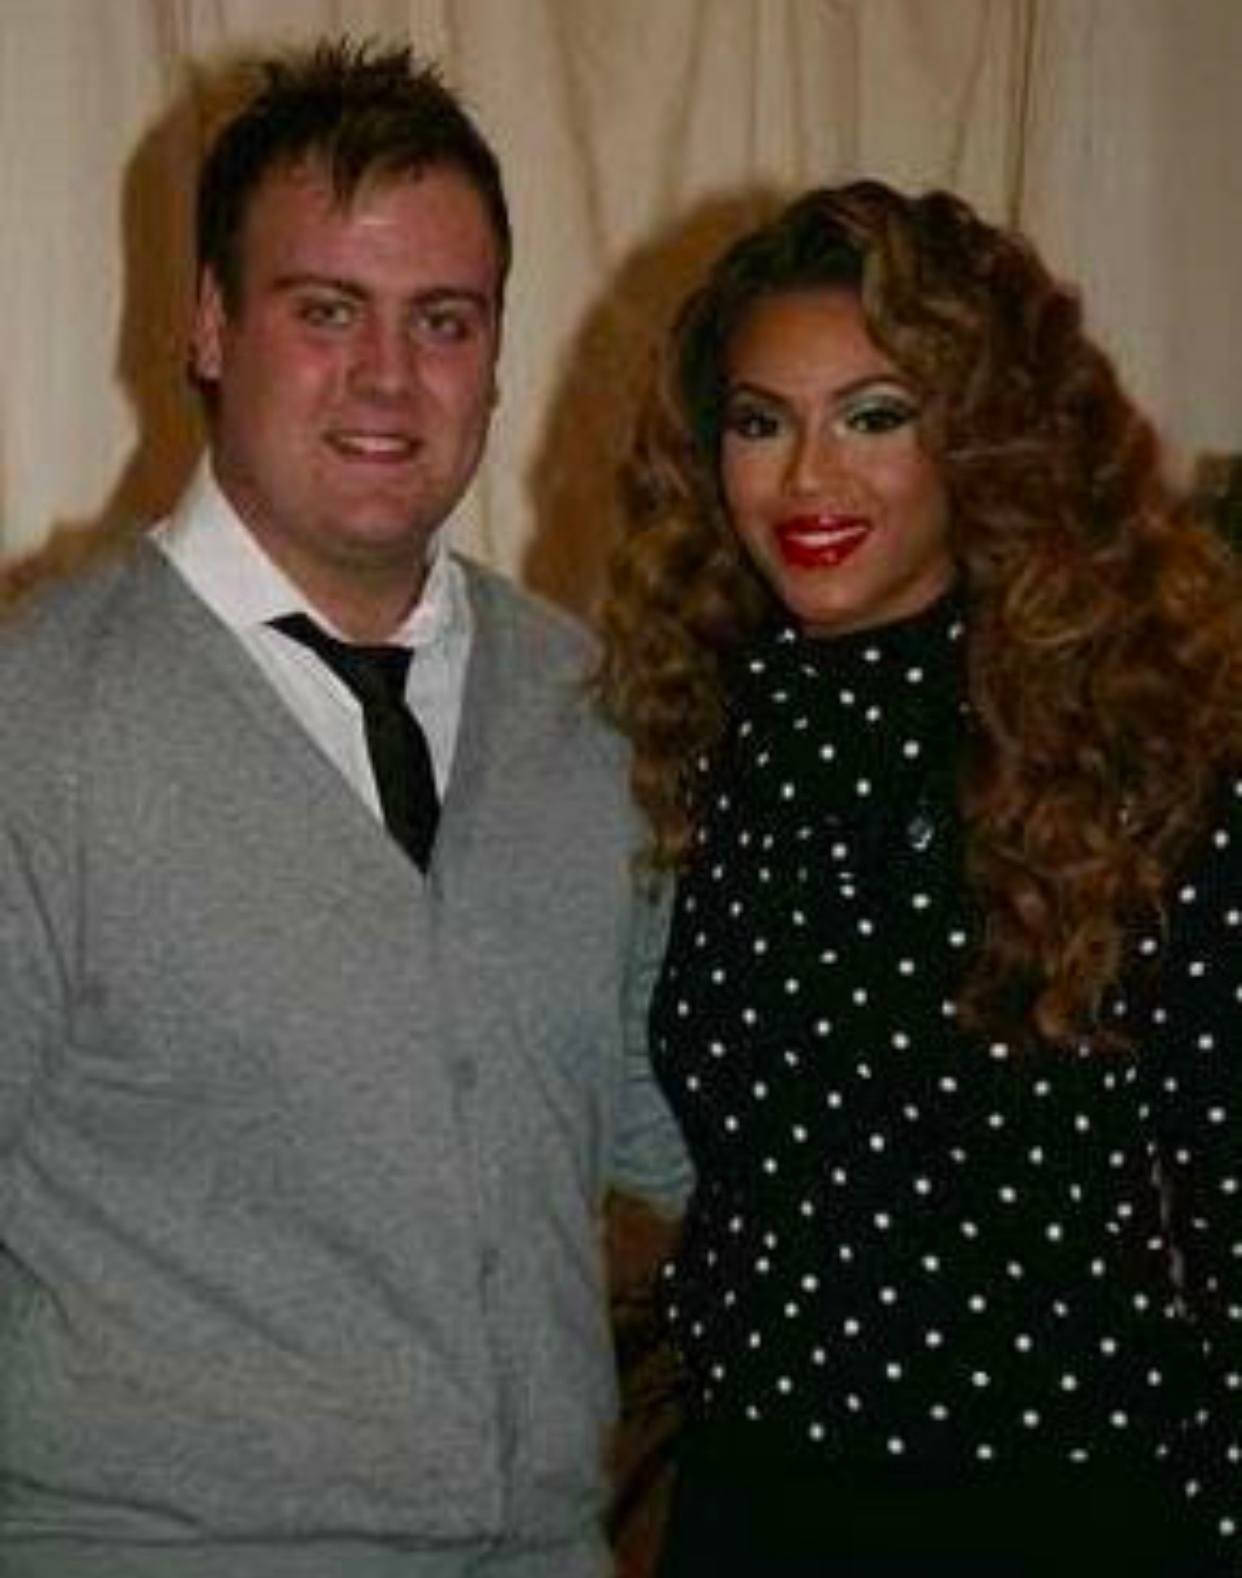 He has met Beyonce at two different events over the years.